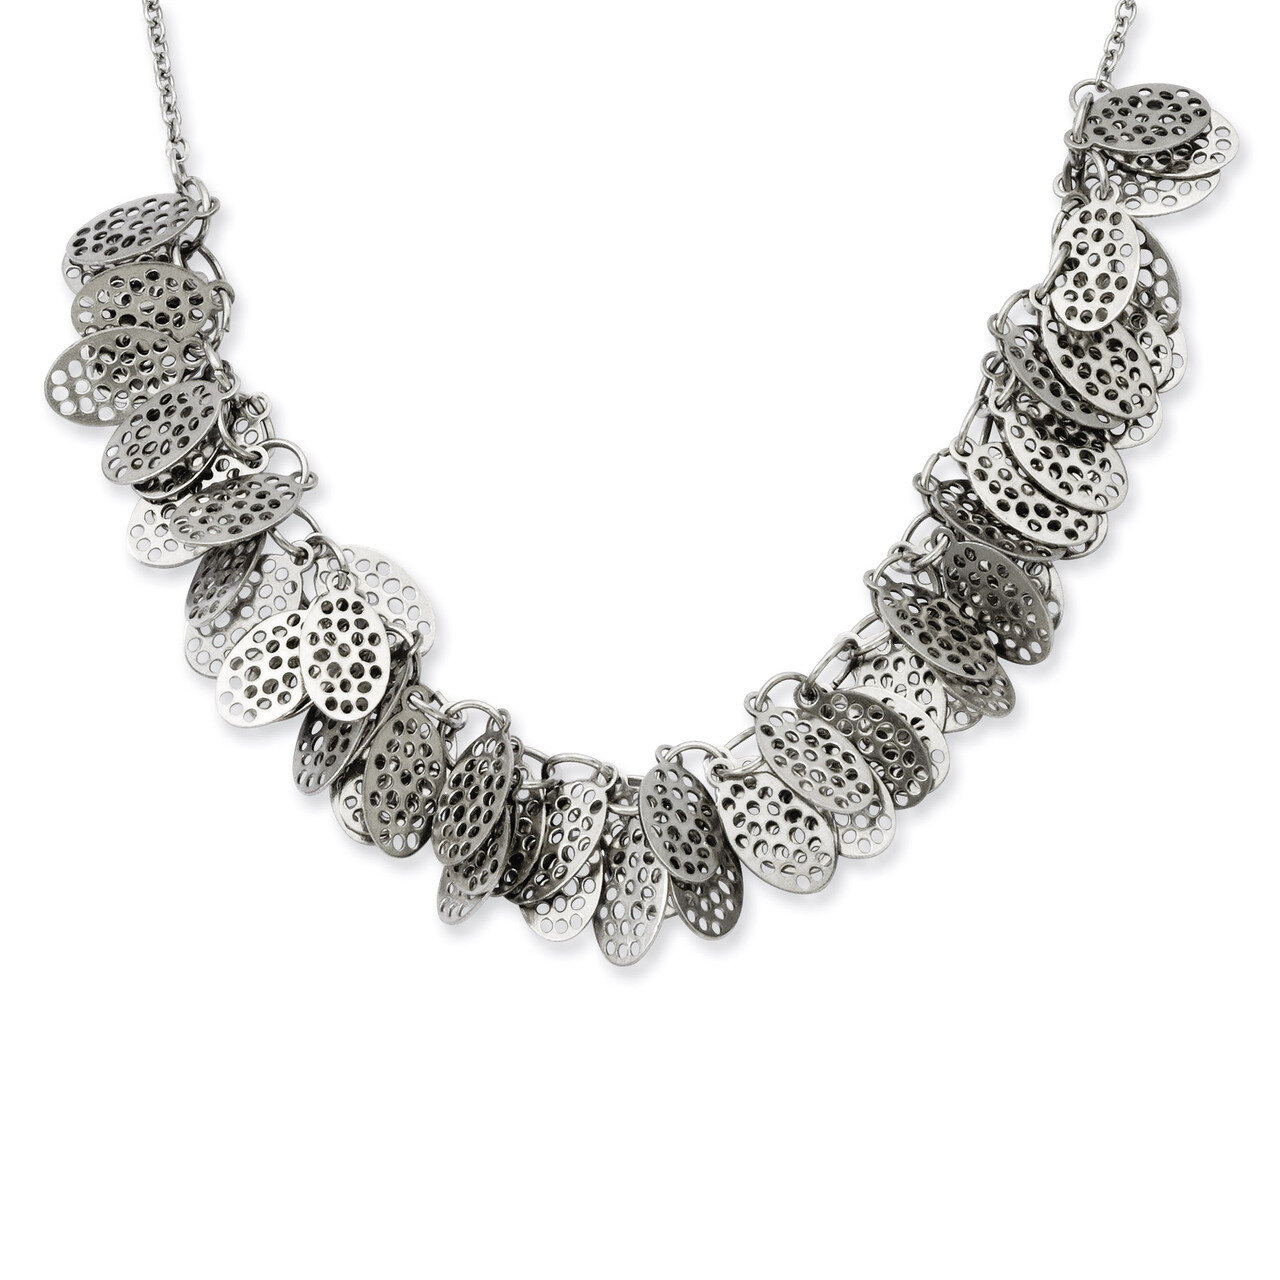 Oval Dangles 18 Inch Necklace - Stainless Steel SRN920